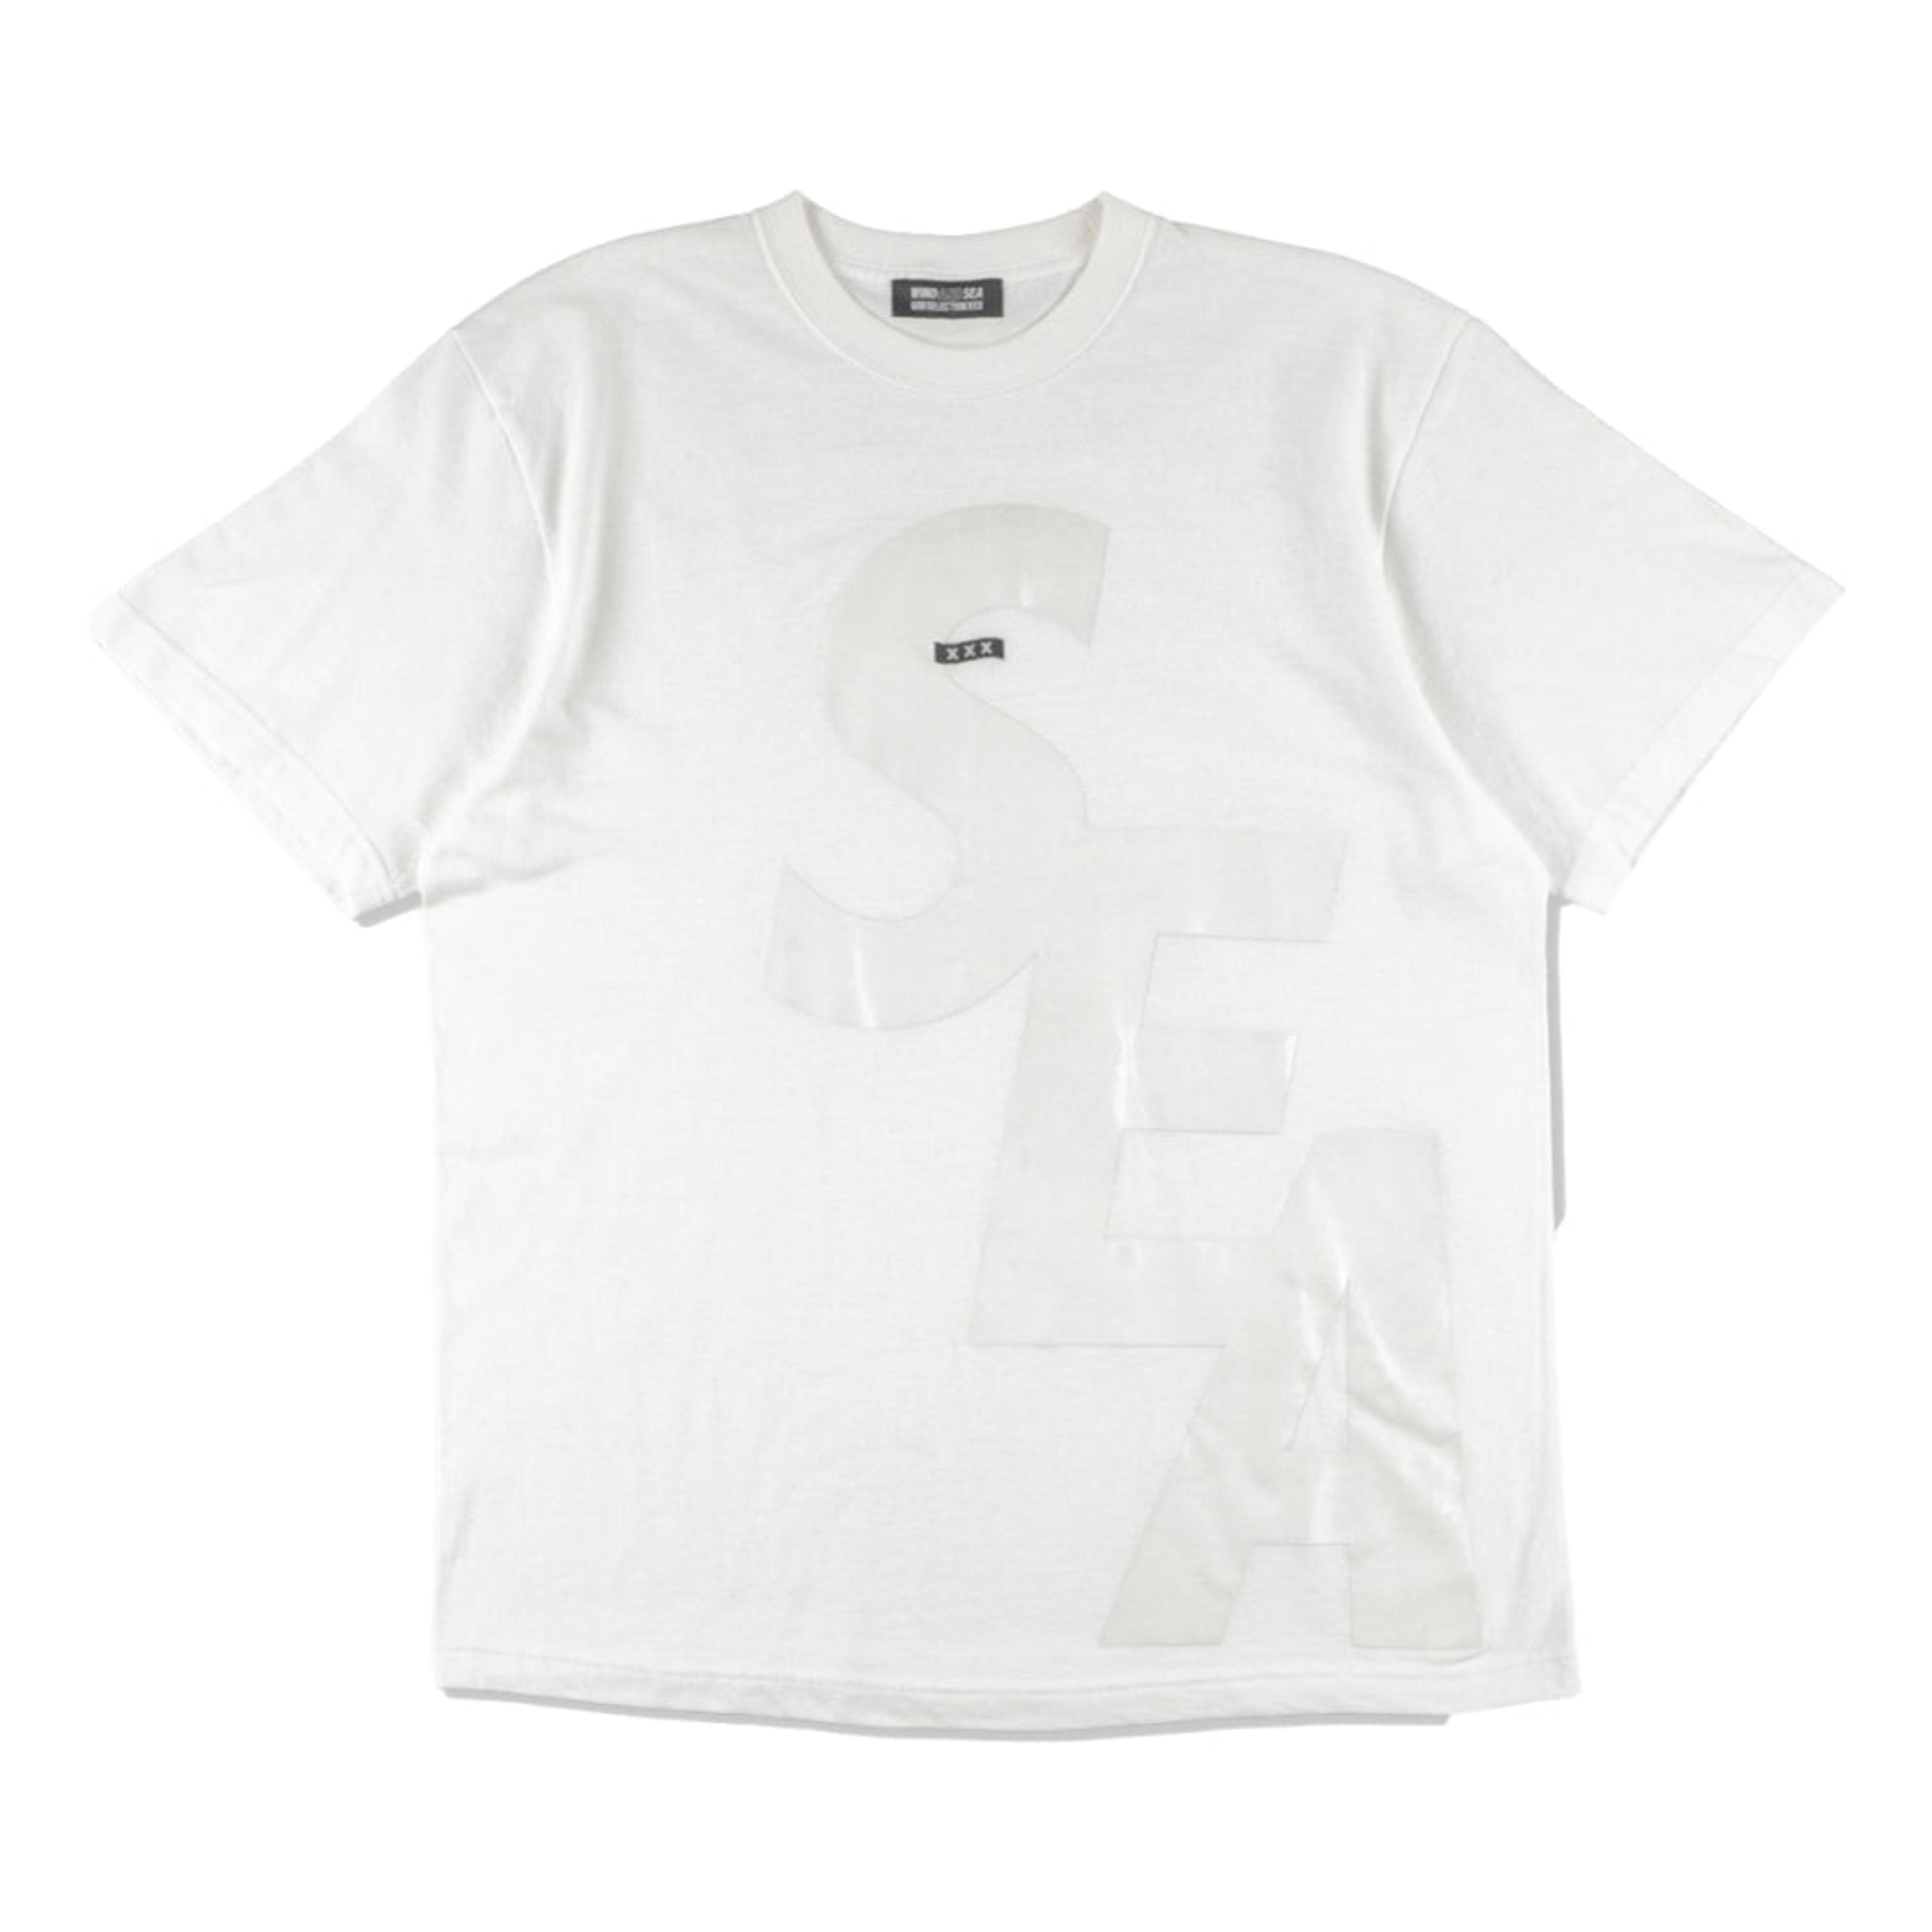 NTWRK - WIND AND SEA GOD SELECTION XXX × WDS (S_E_A) S/S TEE-WHITE